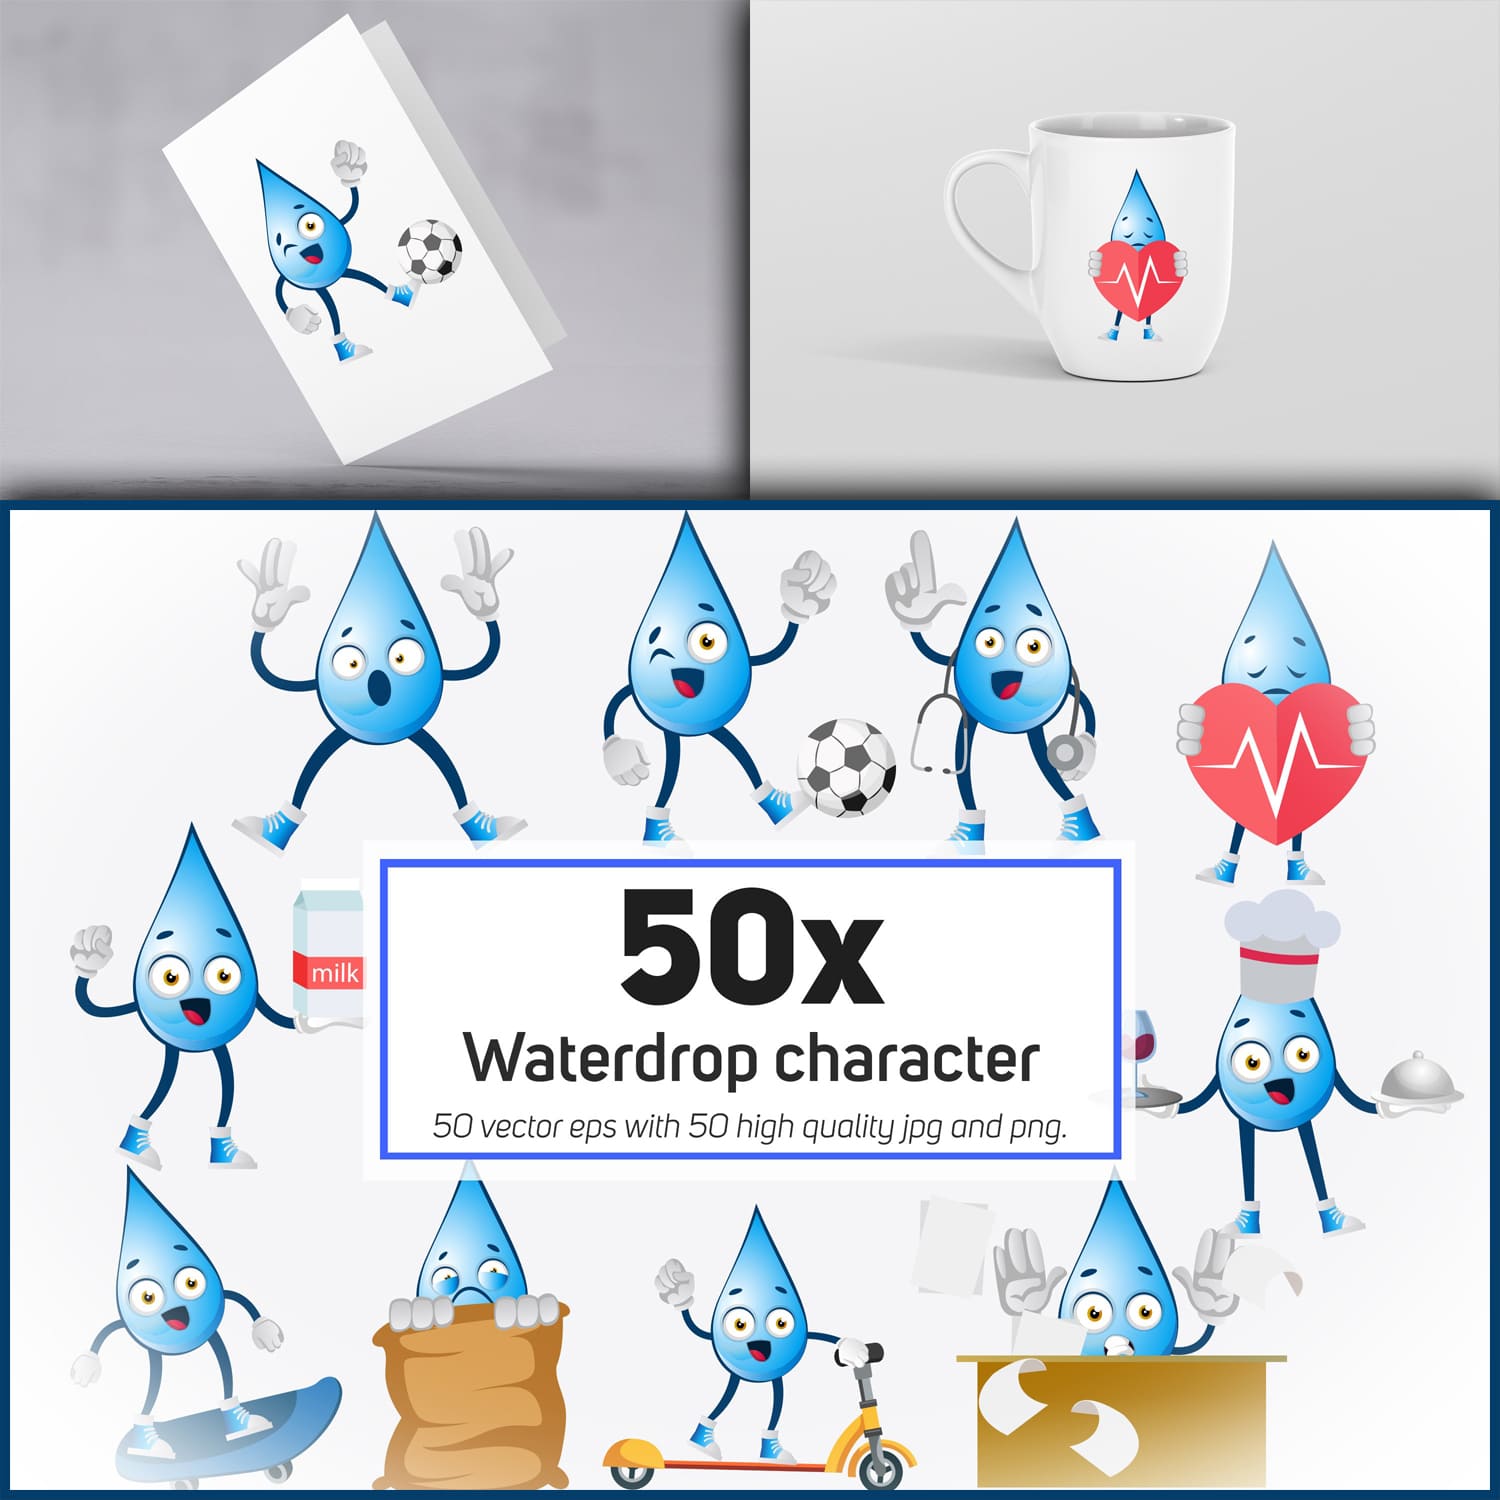 50x Waterdrop character and mascot collection illustration. cover.